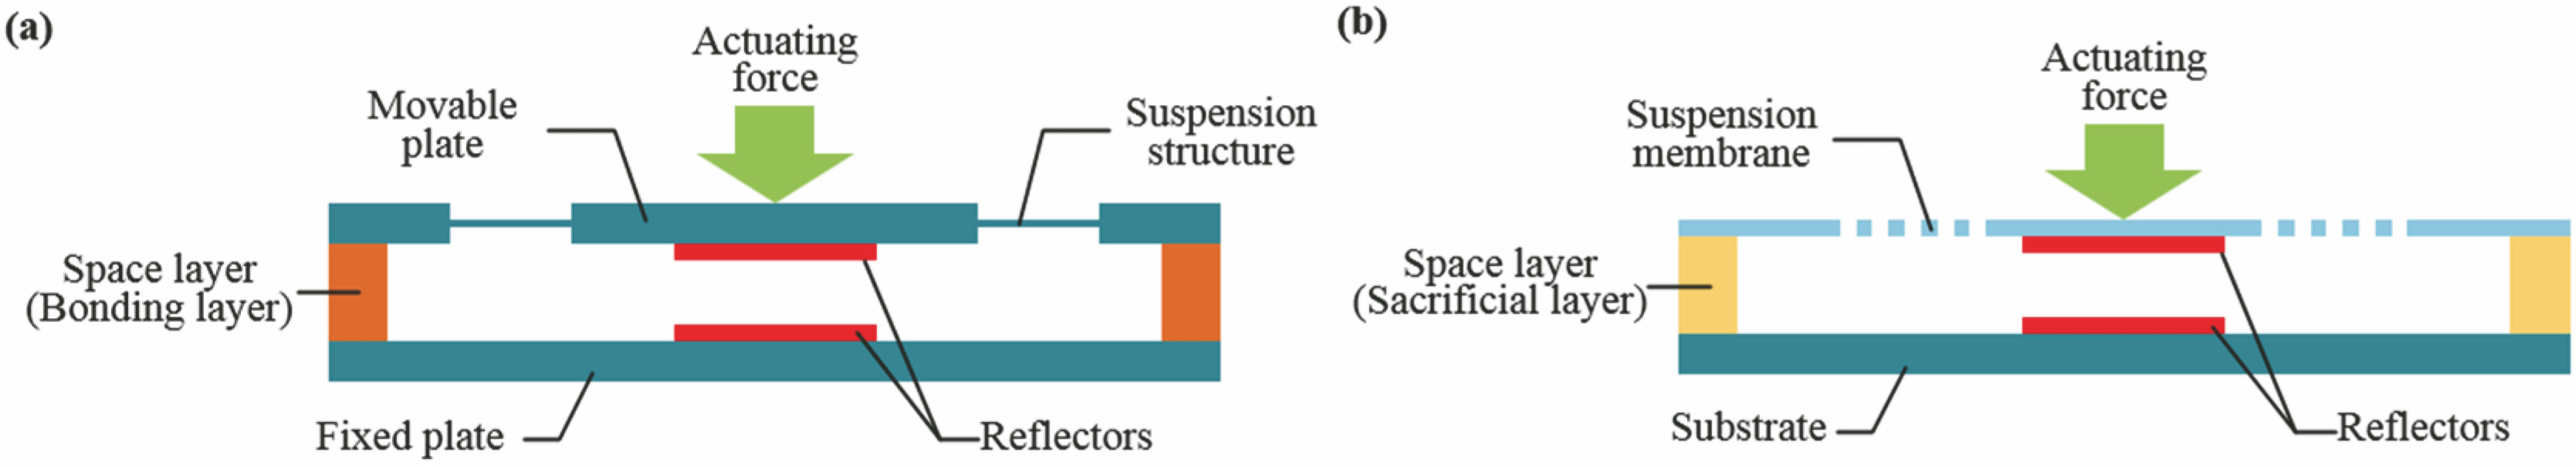 Comparison of MEMS-FP filtering chips based on bulk micromachining and surface micromachining. (a) Bulk micromachining; (b) surface micromachining